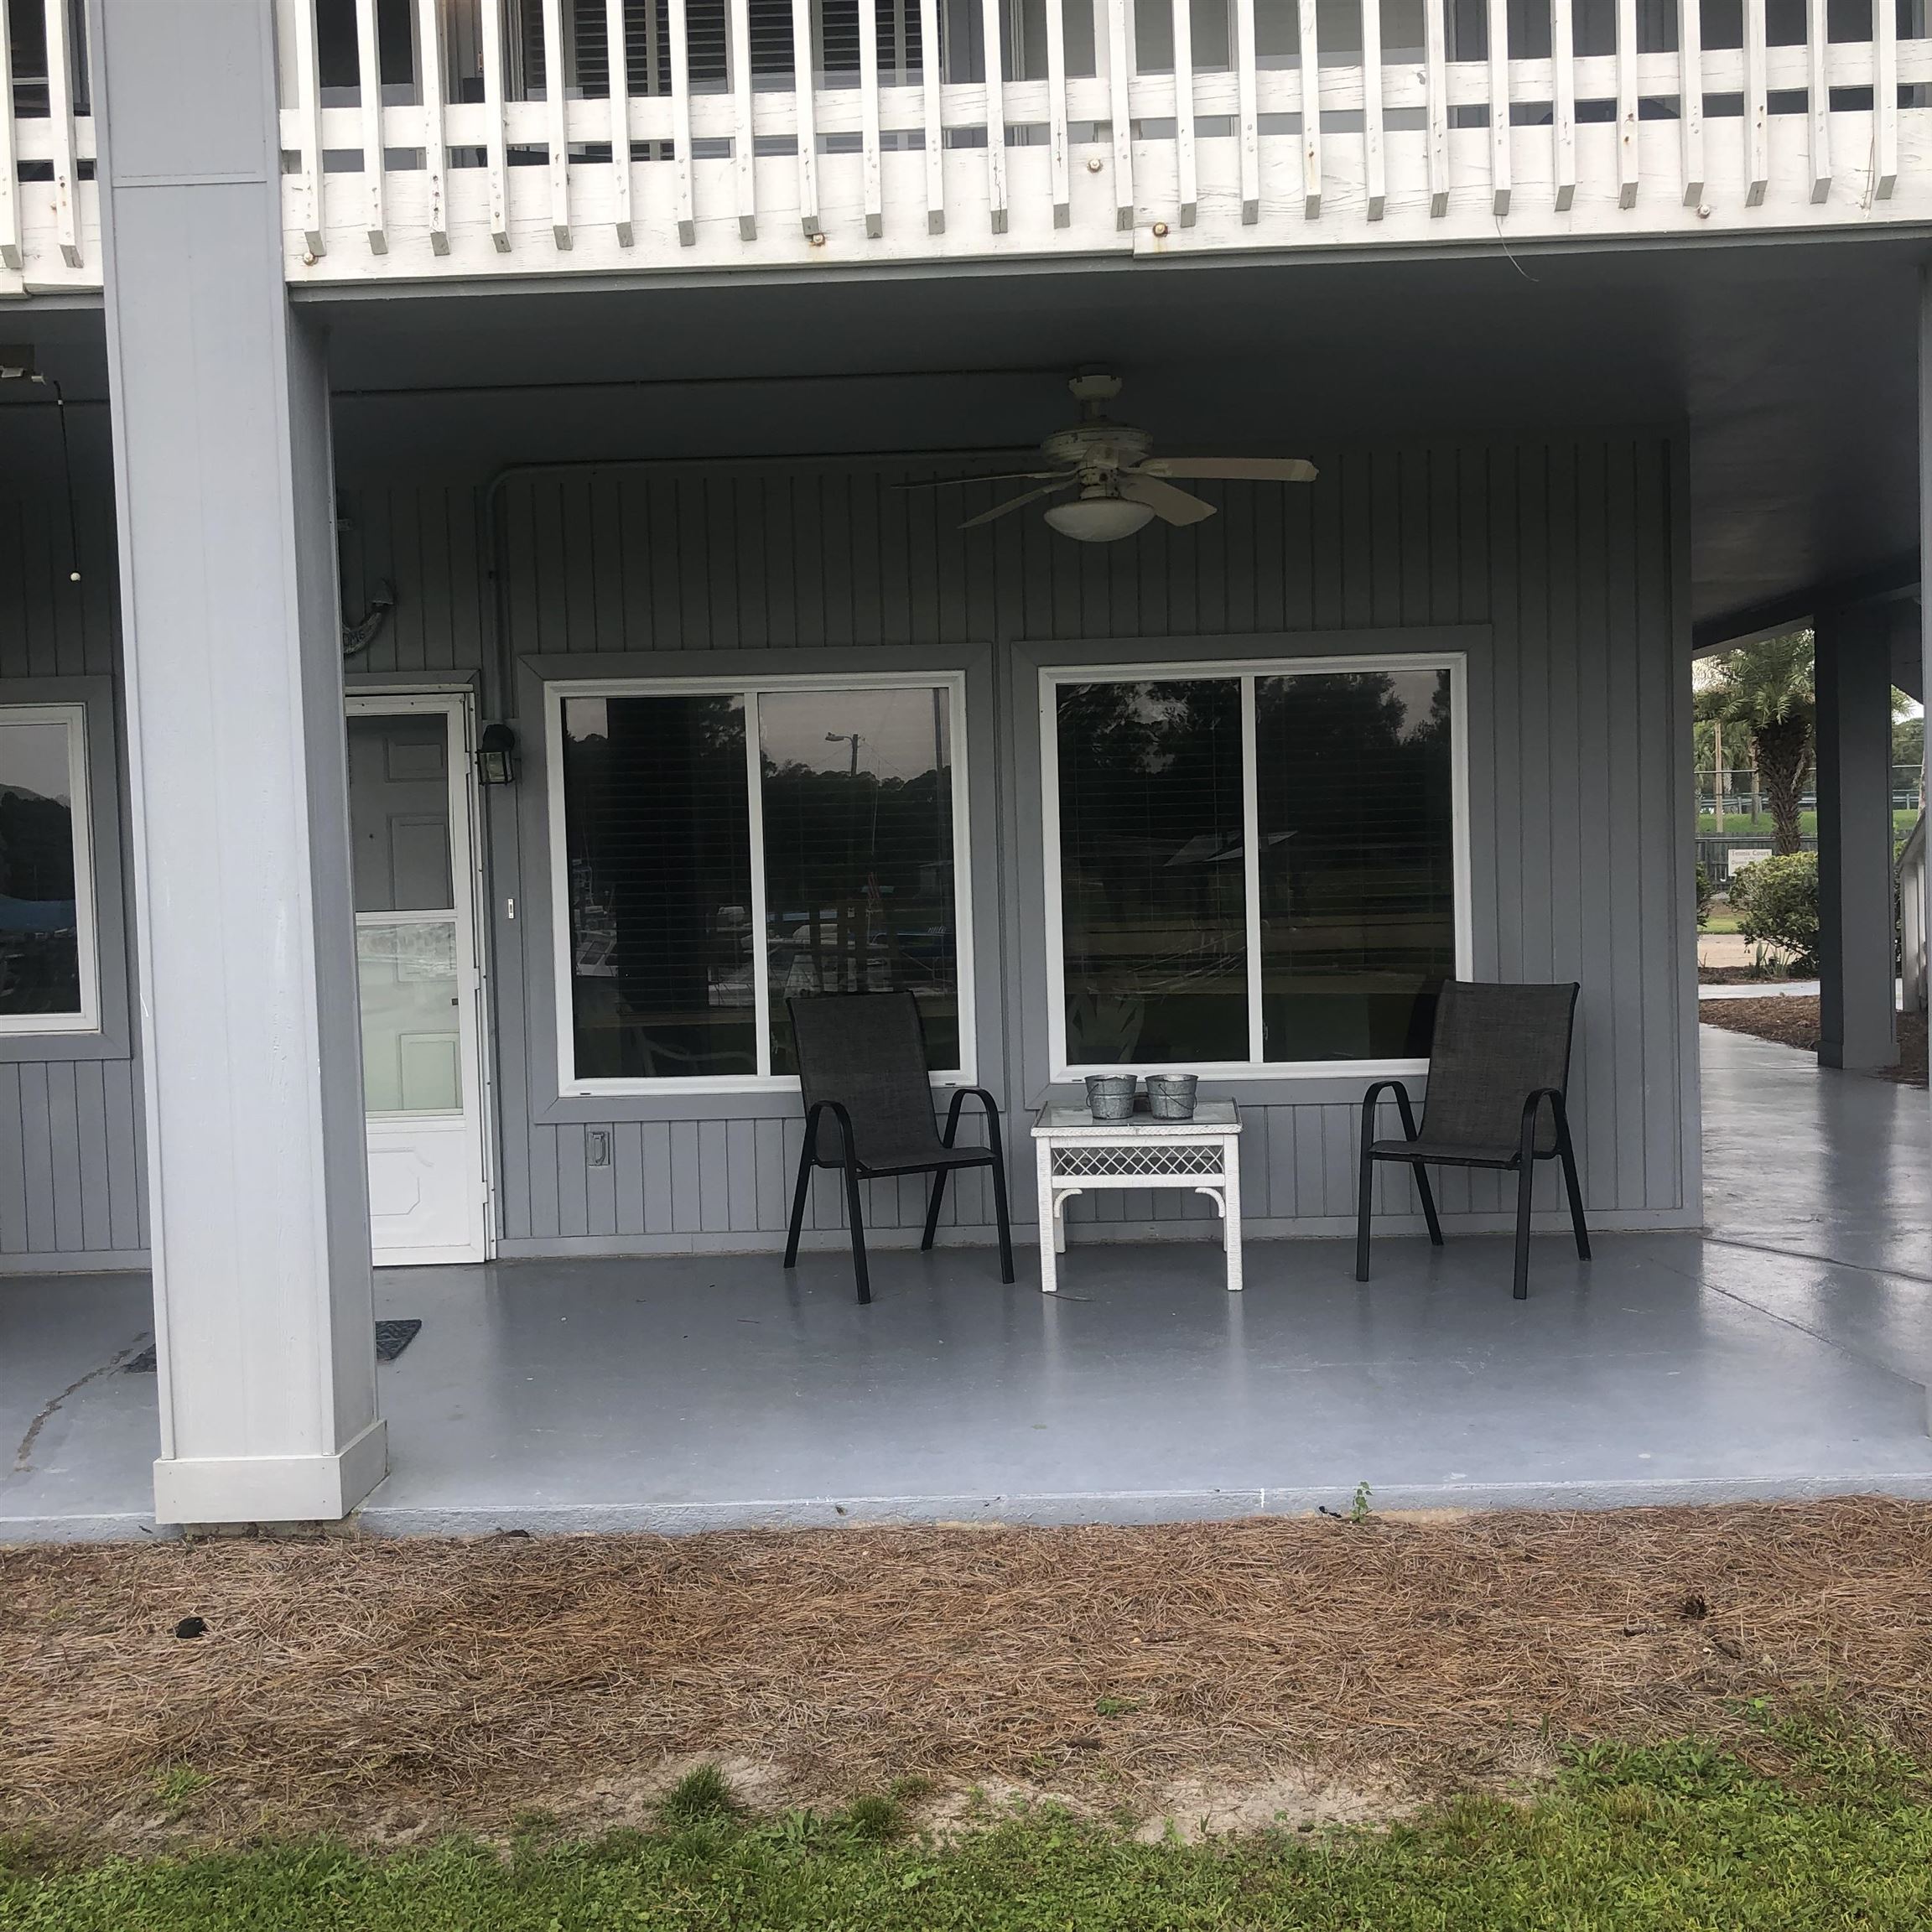 11 Mashes Sands Road,PANACEA,Florida 32346,2 Bedrooms Bedrooms,1 BathroomBathrooms,Condo,11 Mashes Sands Road,369974